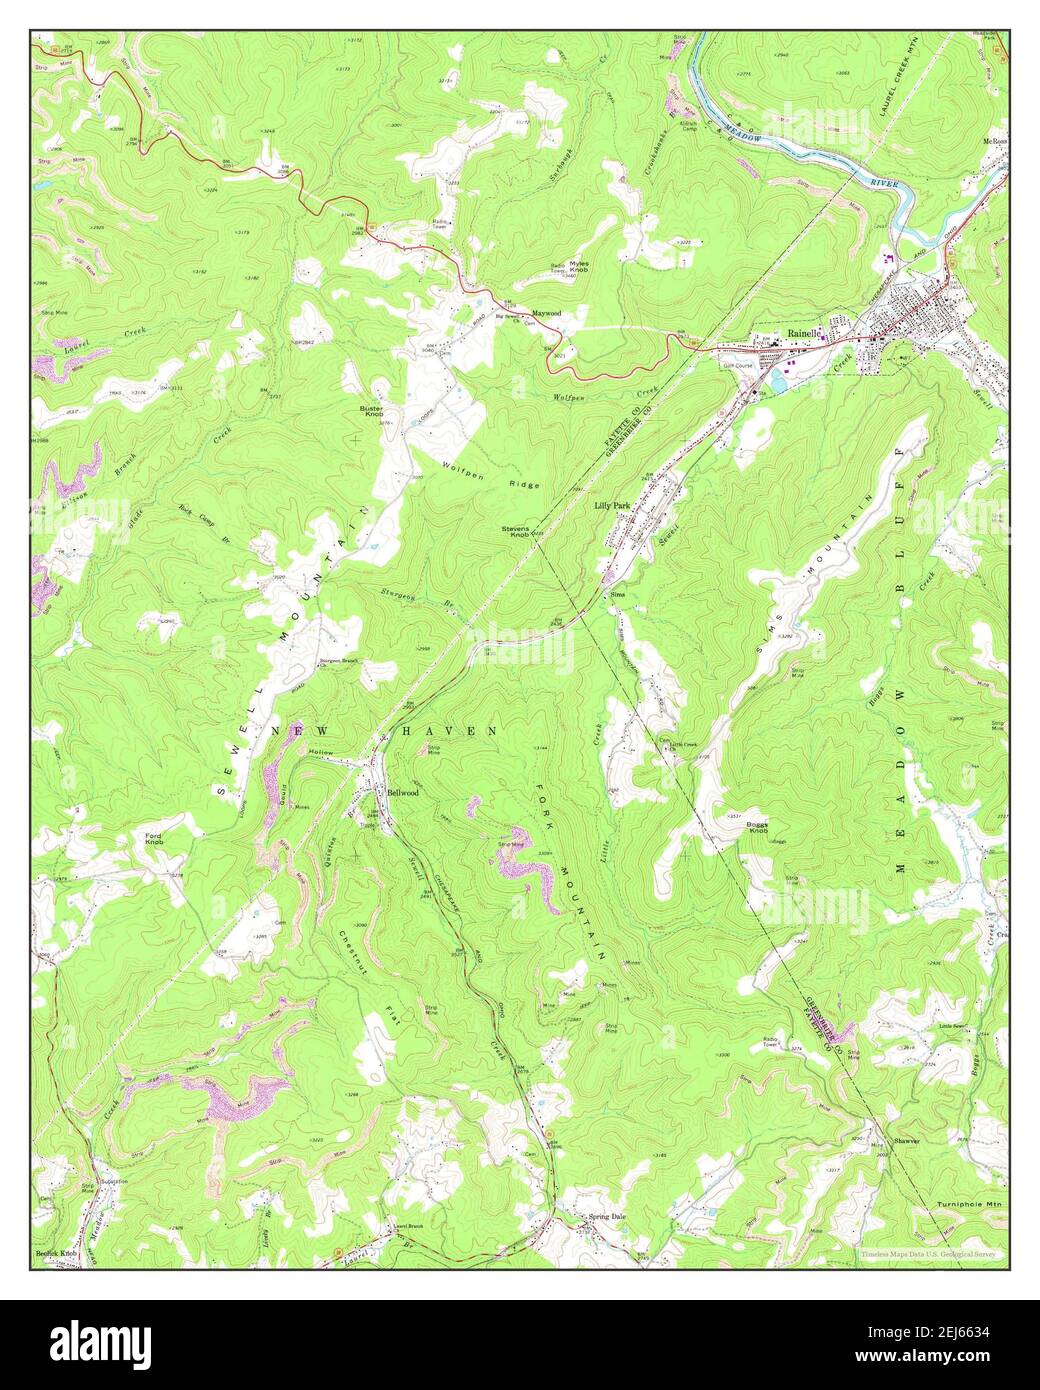 Rainelle, West Virginia, map 1969, 1:24000, United States of America by Timeless Maps, data U.S. Geological Survey Stock Photo